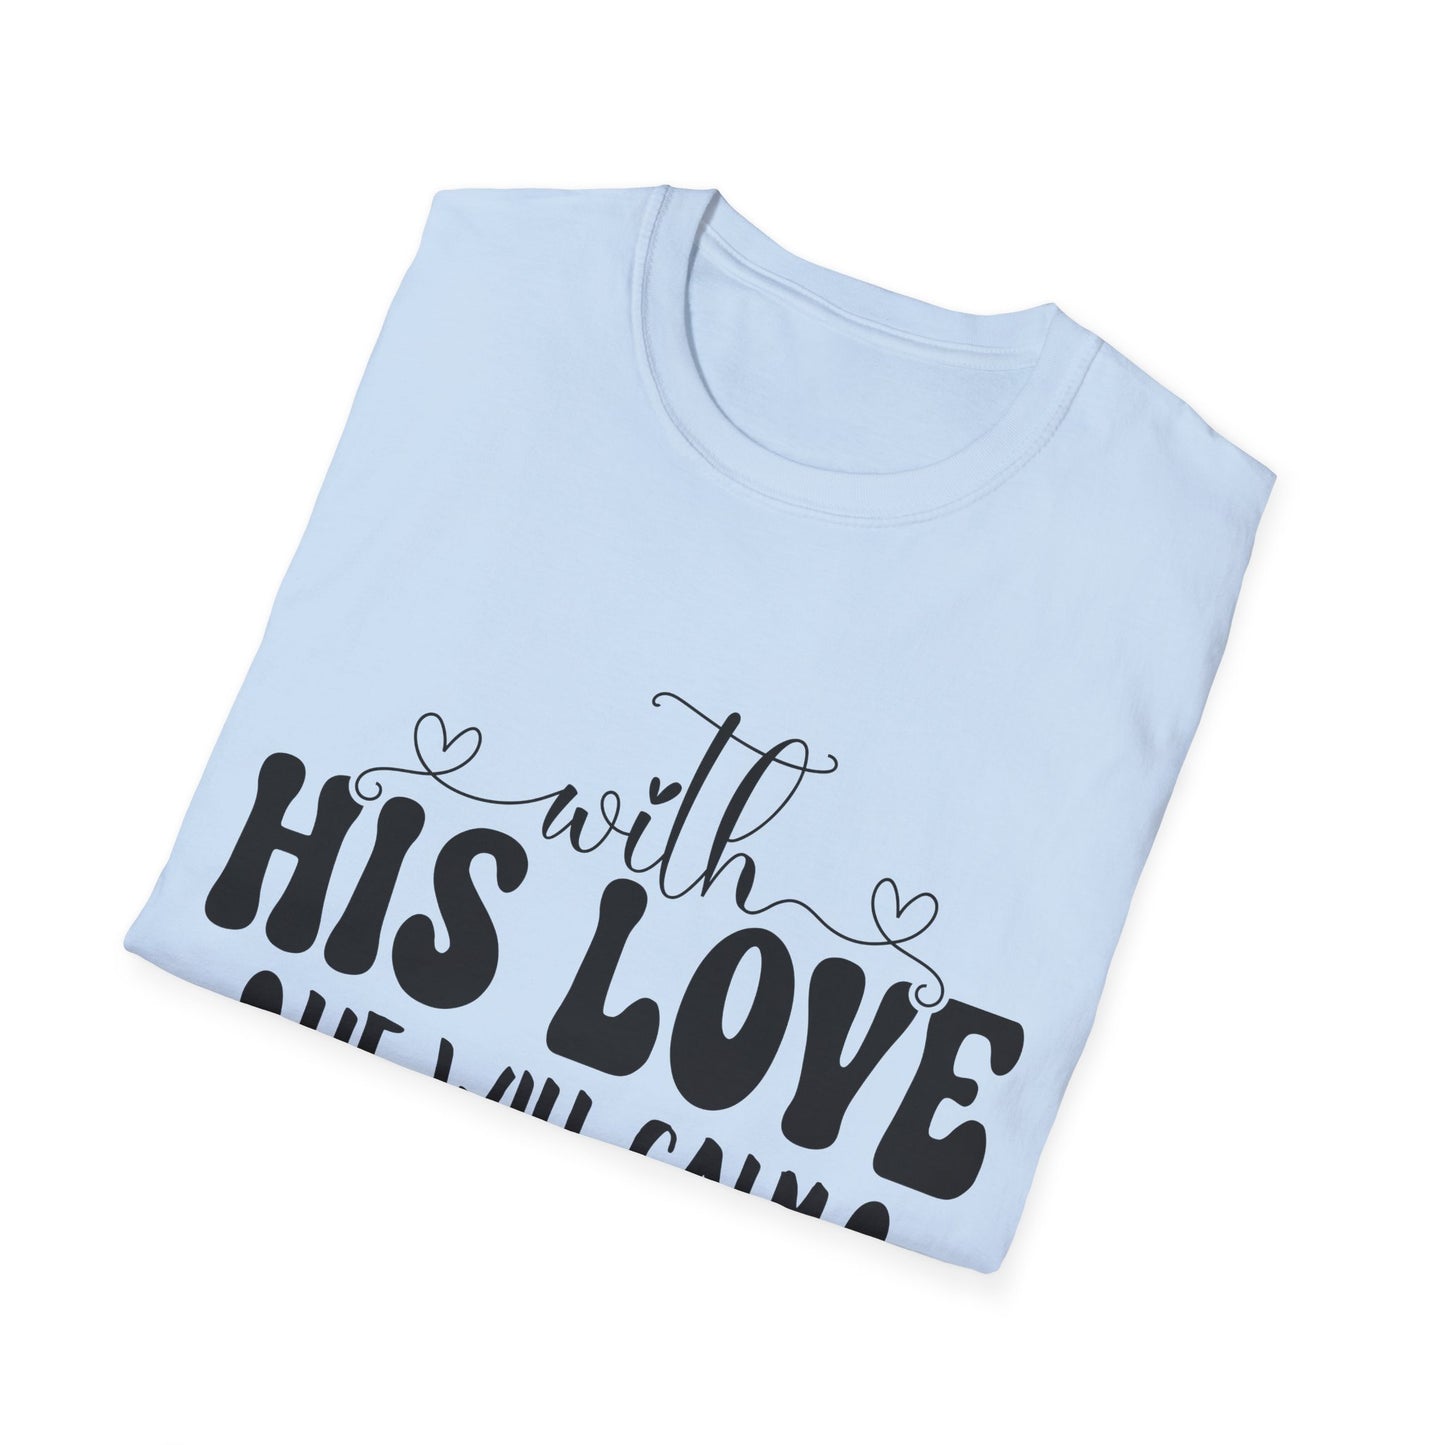 With His Love He Will Calm All Your Fears Zephaniah 3:17 Triple Viking T-Shirt